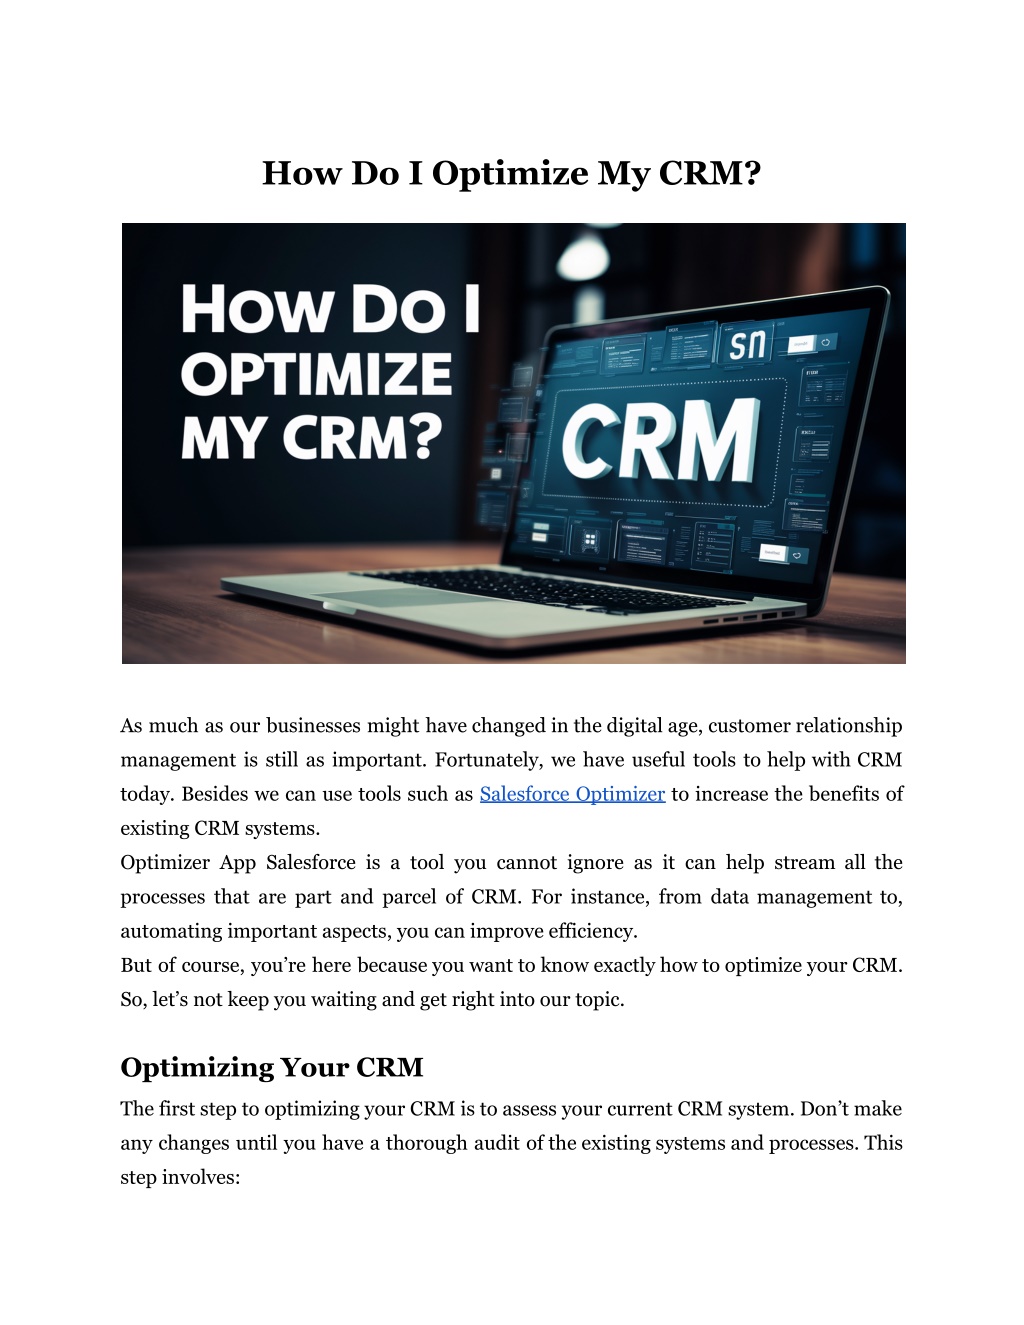 how do i optimize my crm l.w